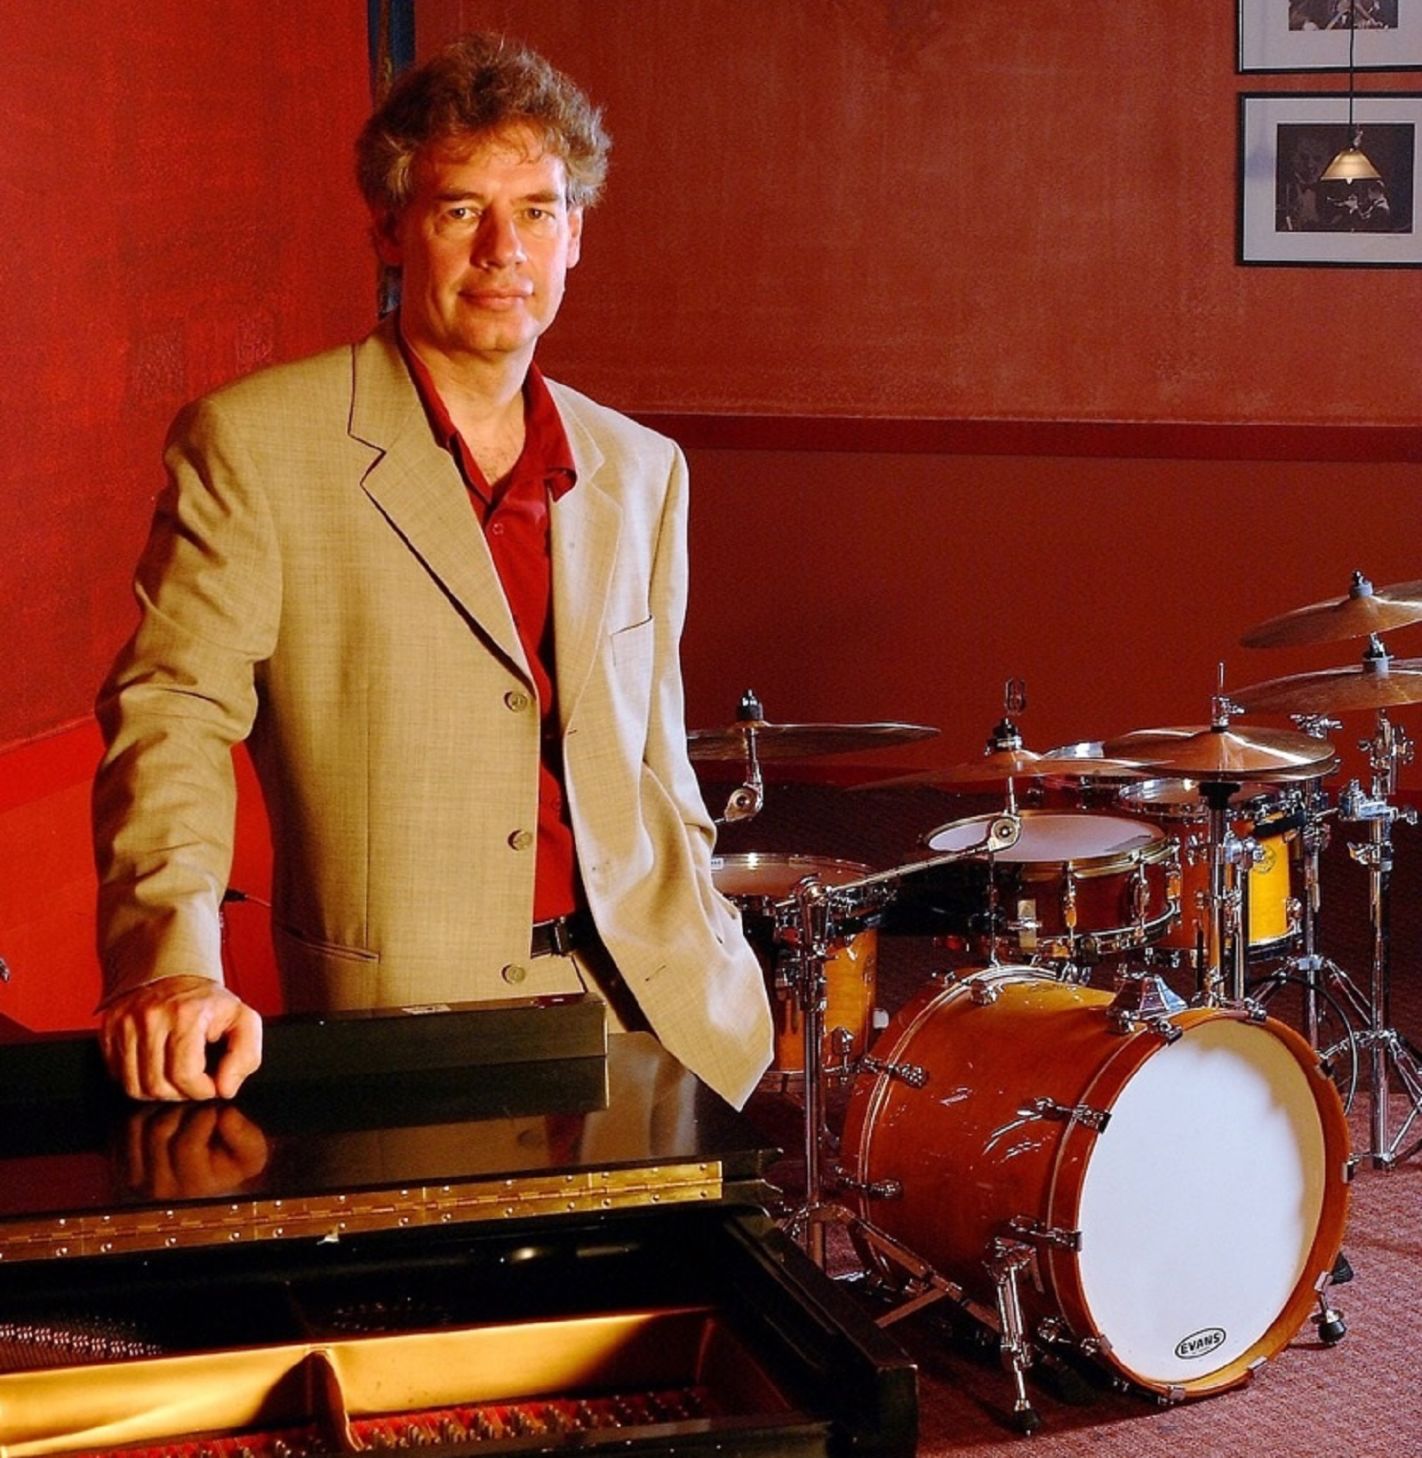 Give the drummer some: Bill Bruford comes to UB